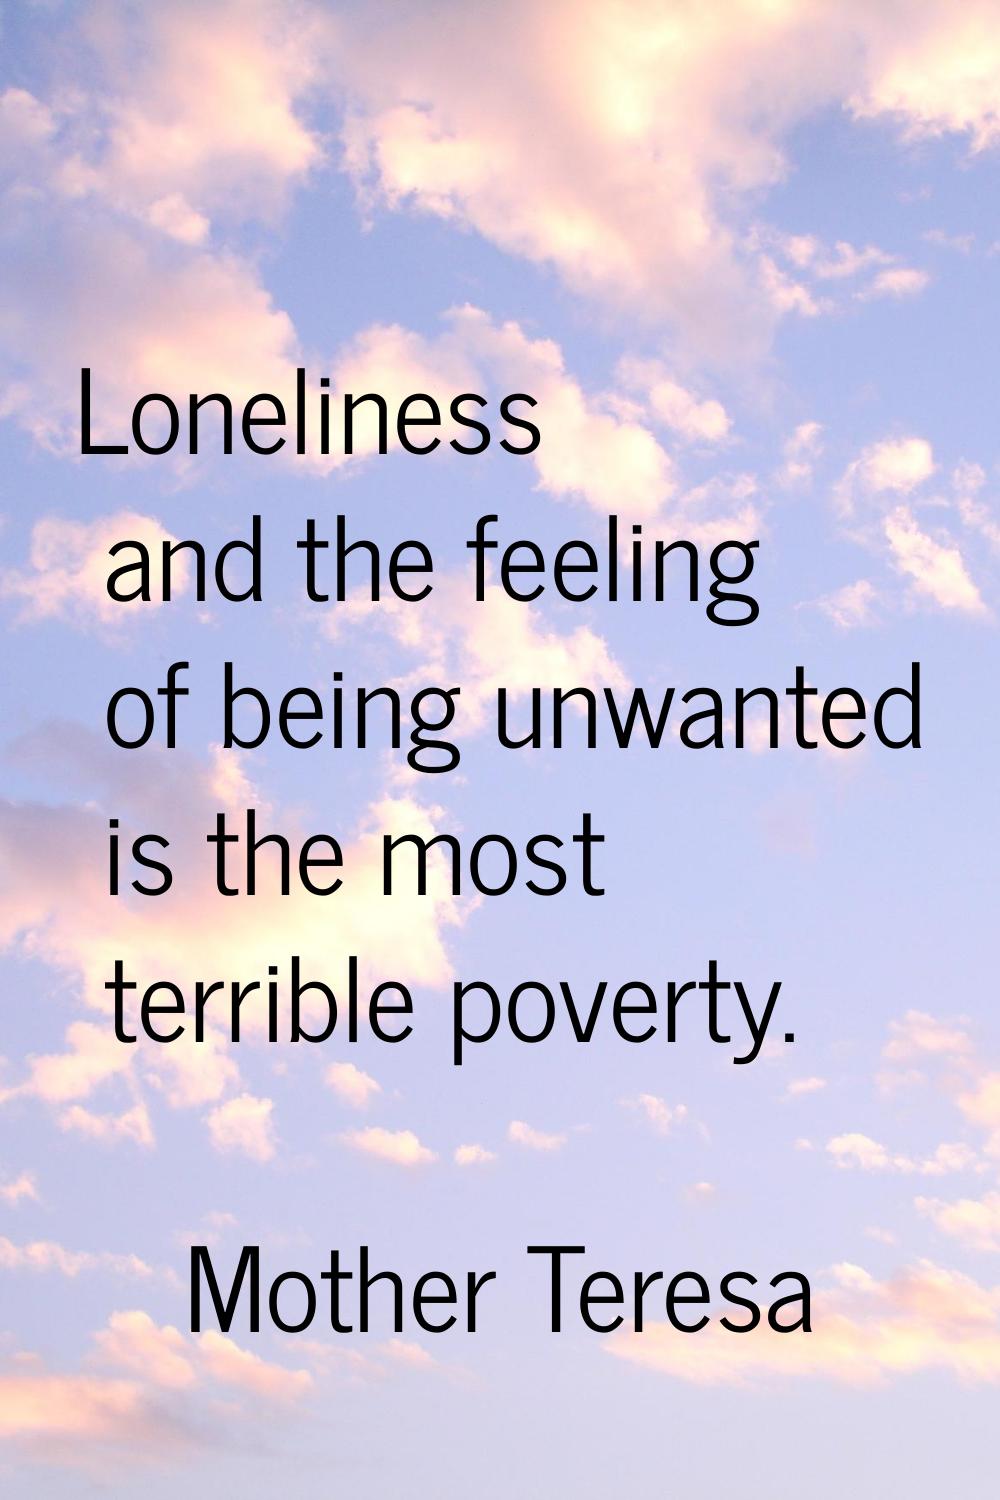 Loneliness and the feeling of being unwanted is the most terrible poverty.